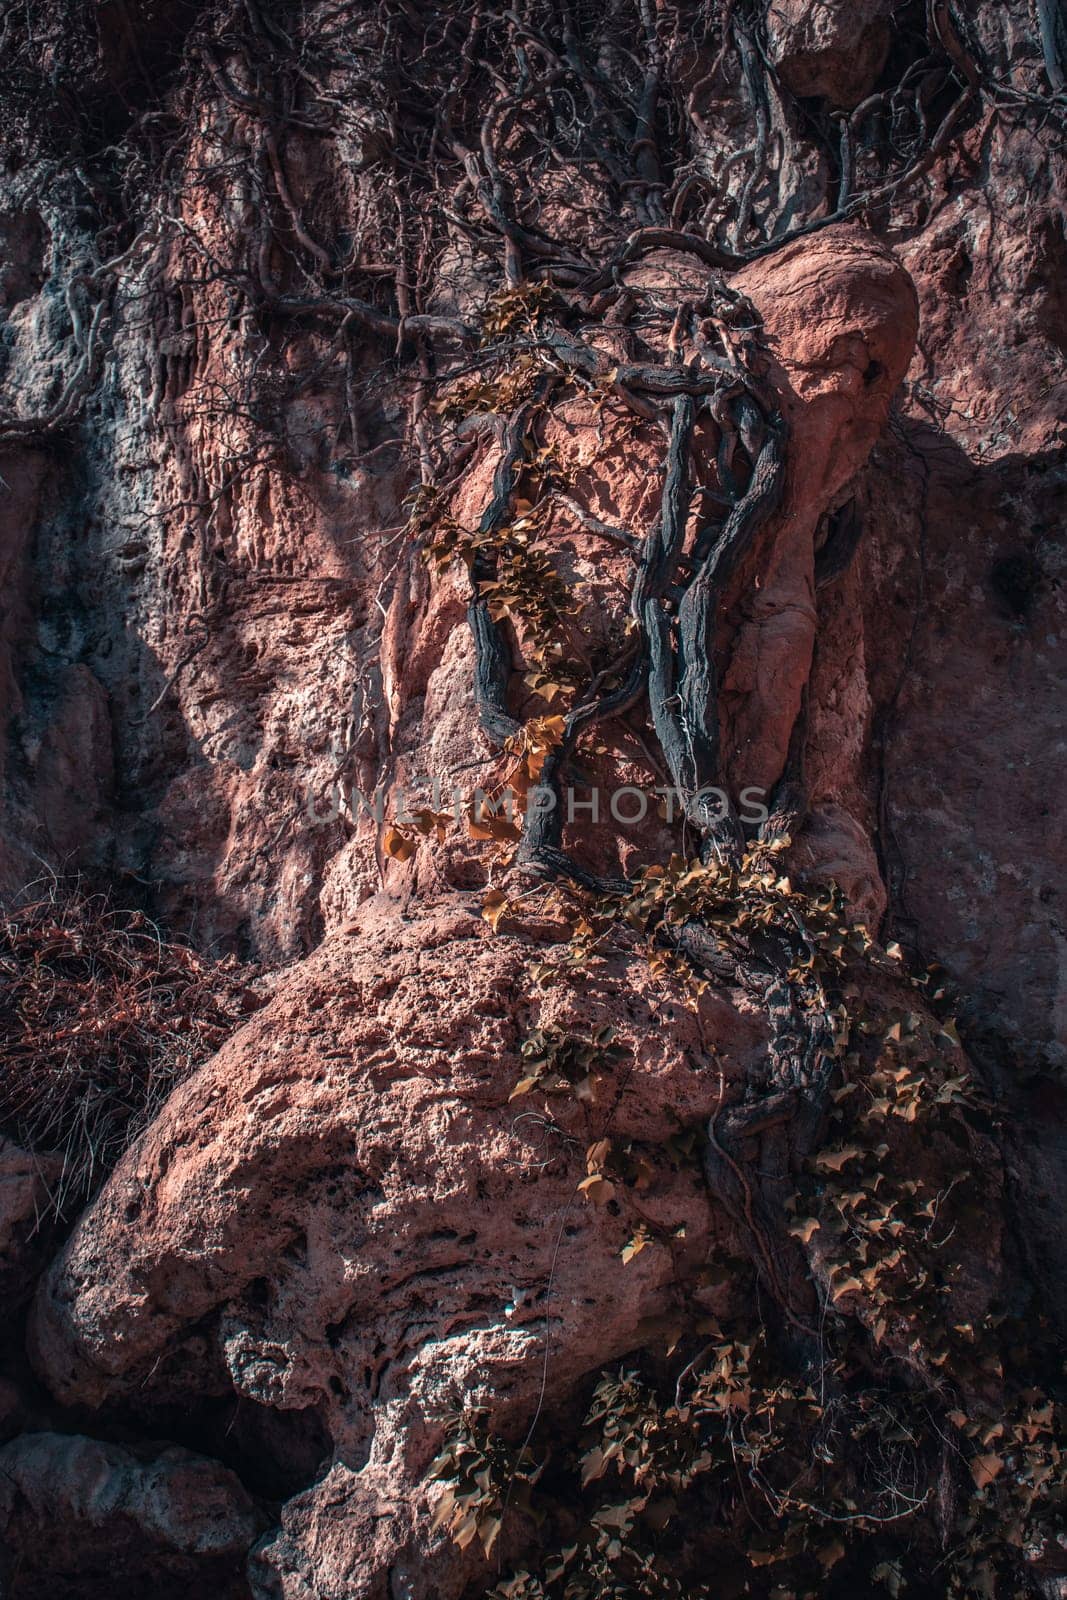 Climbing ivy plant on rocky cliff photo. Natural park of Sant Miquel del Fai. Sandstone wall covered with growing vines photography. High quality picture for wallpaper, travel blog.